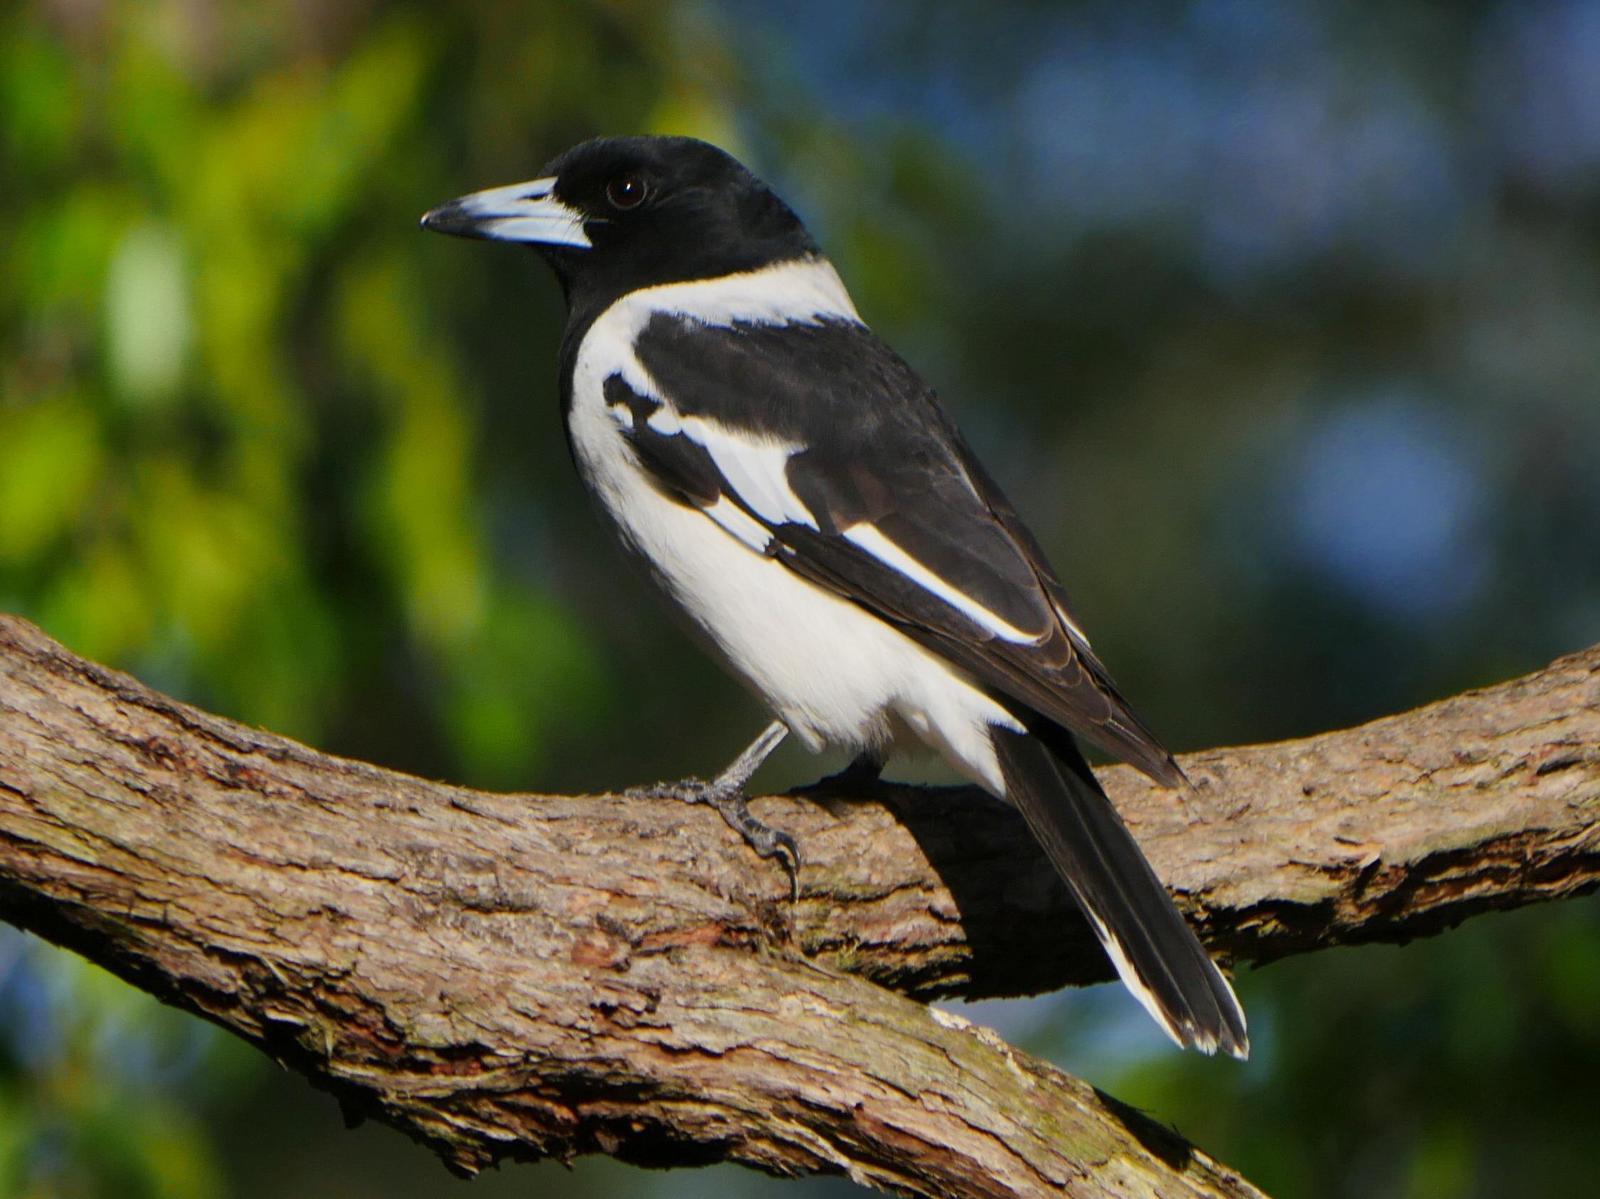 Pied Butcherbird Photo by Peter Lowe